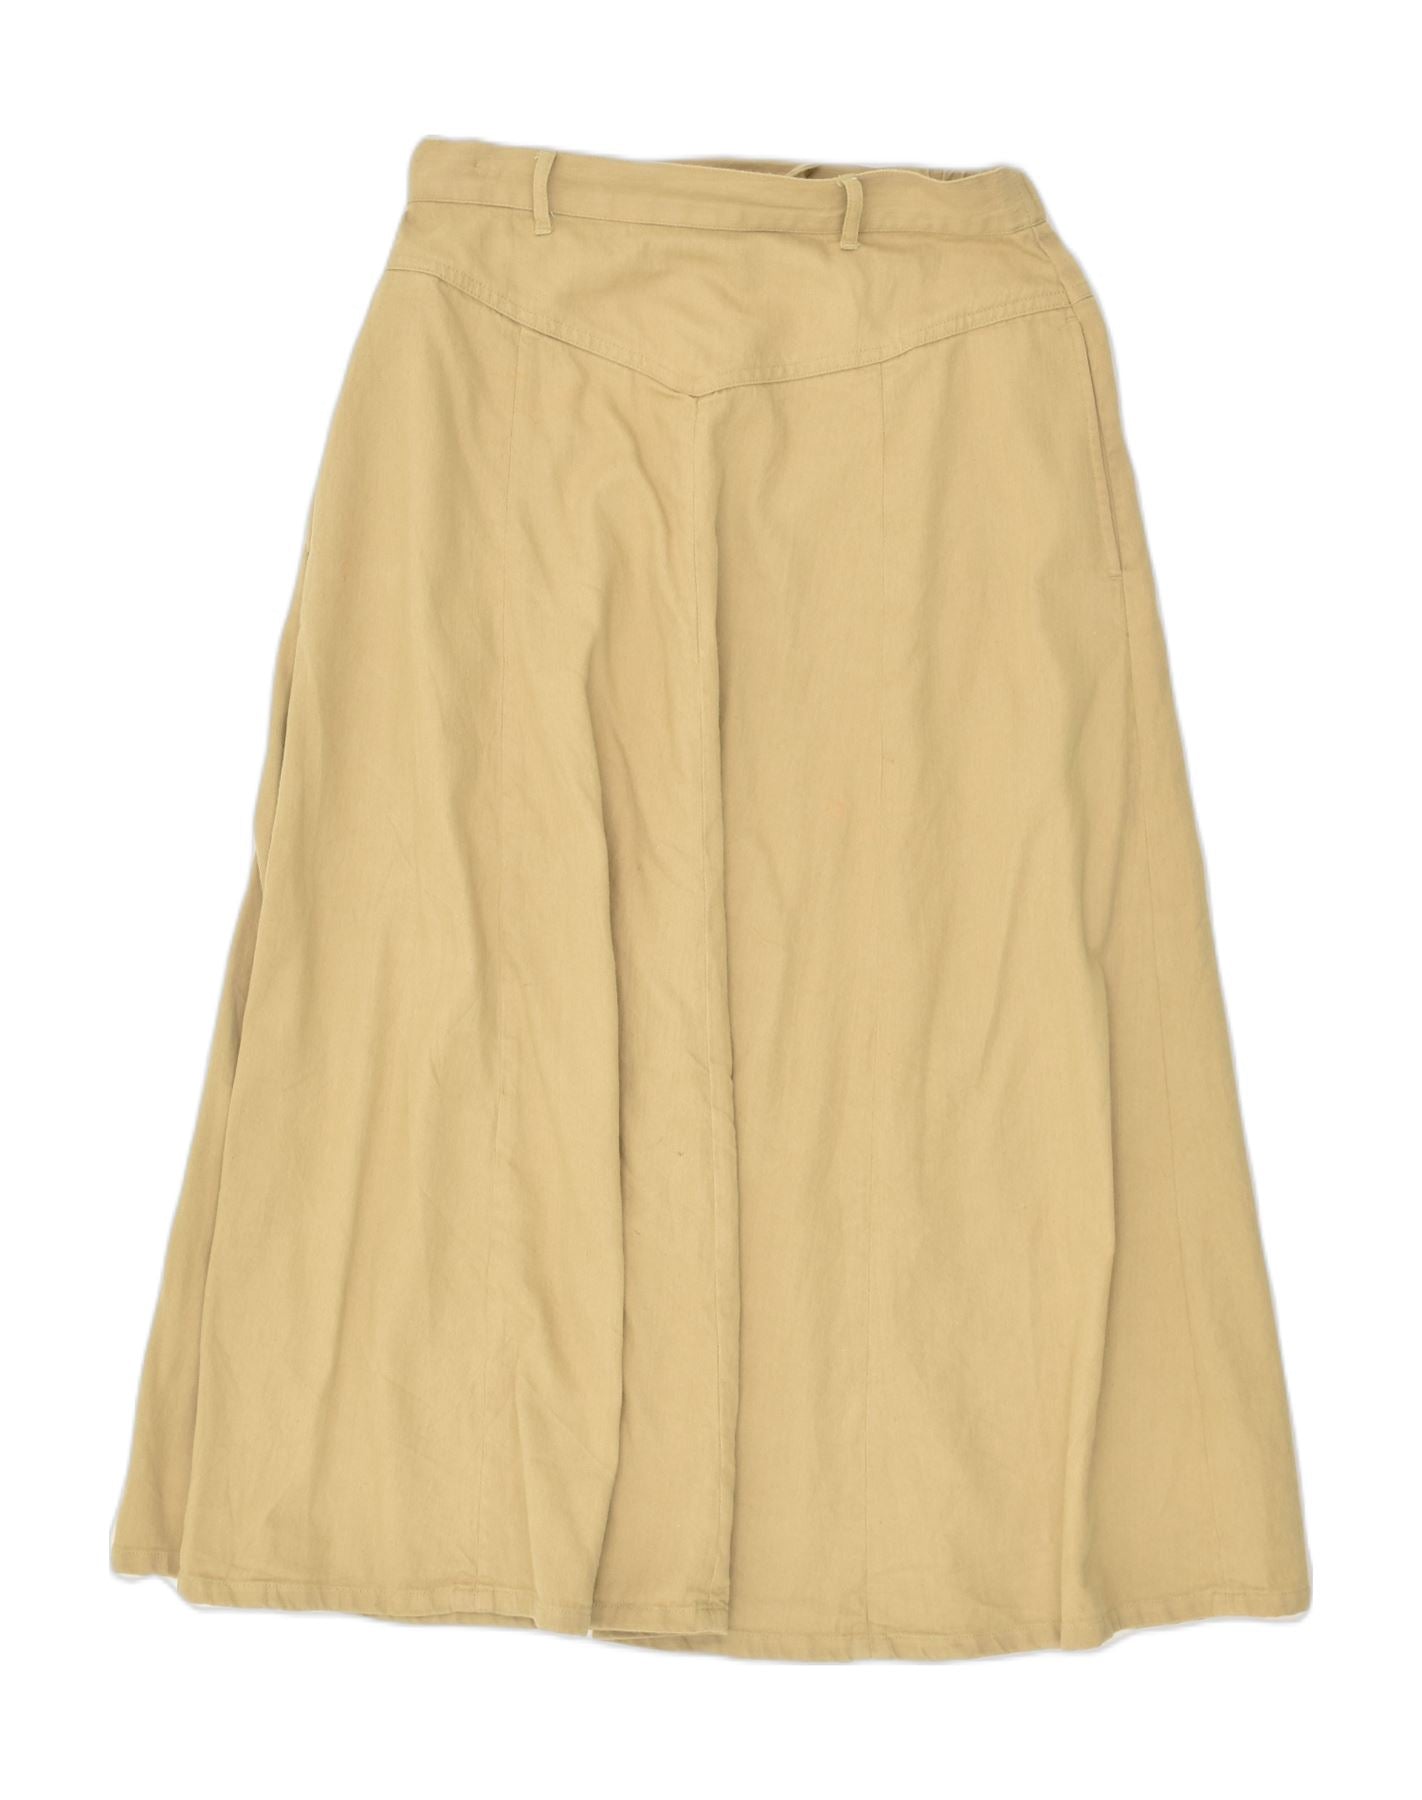 ORVIS Womens A-Line Skirt US 10 Large W30 Beige Cotton